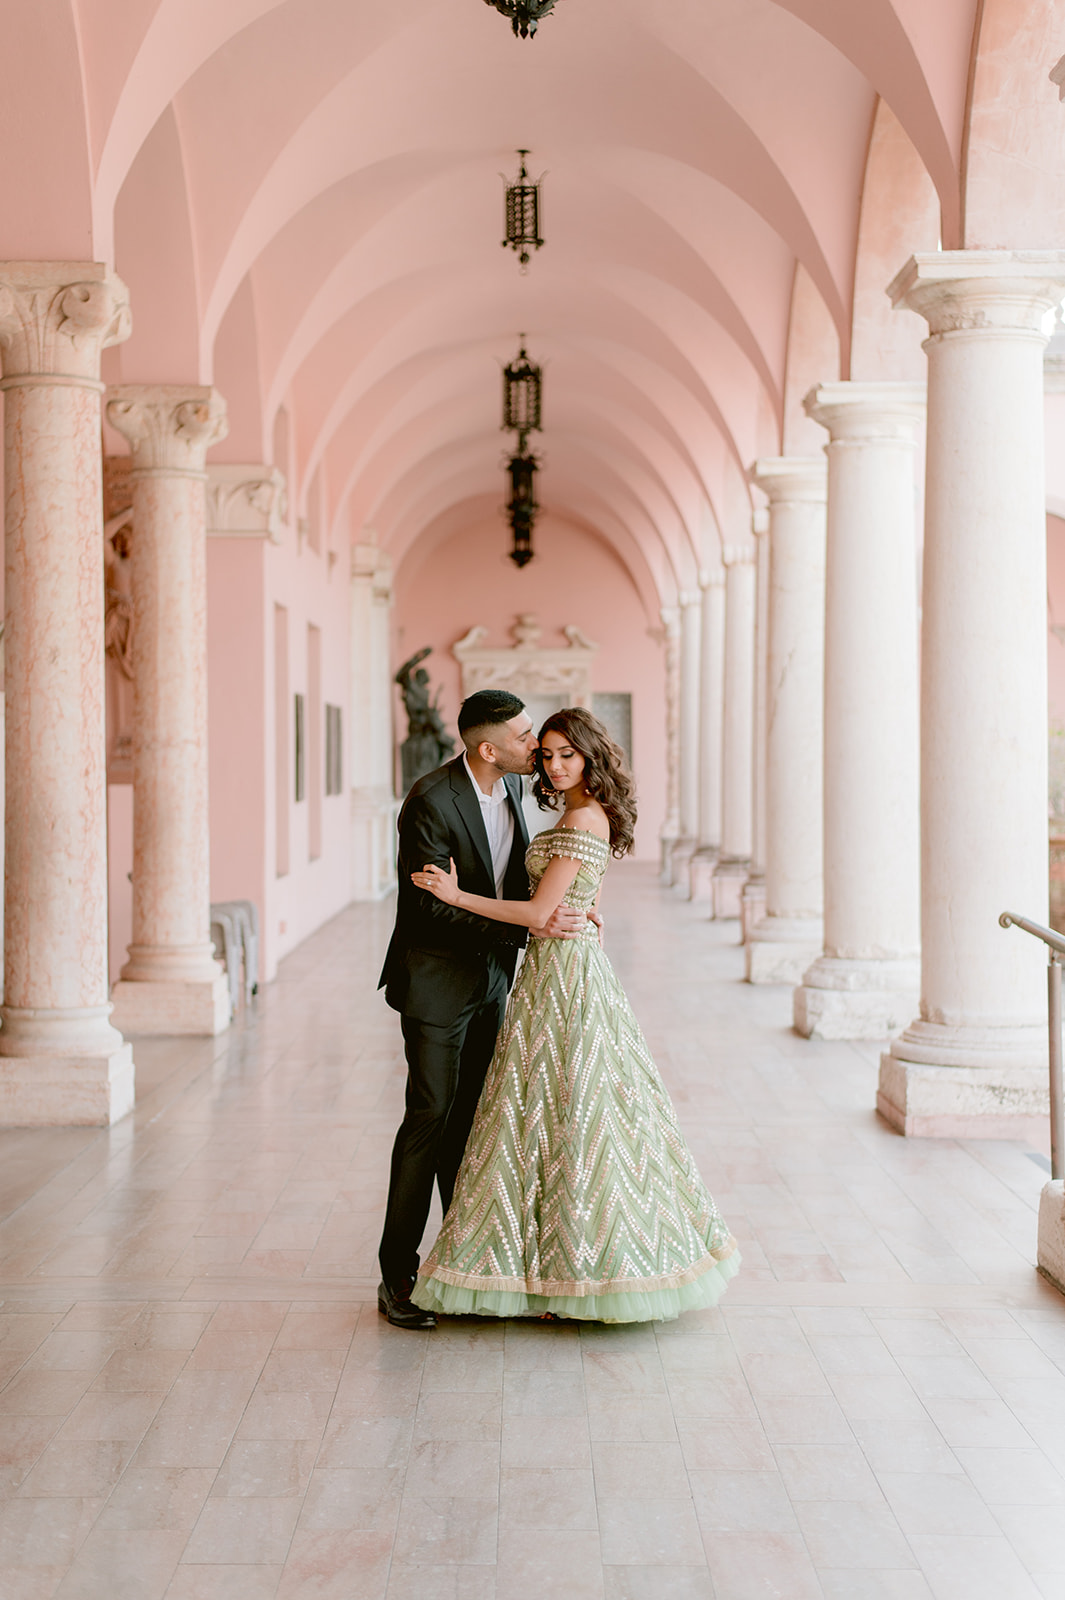 "Ringling Museum's Ca' d'Zan mansion provides the perfect location for engagement photos"
